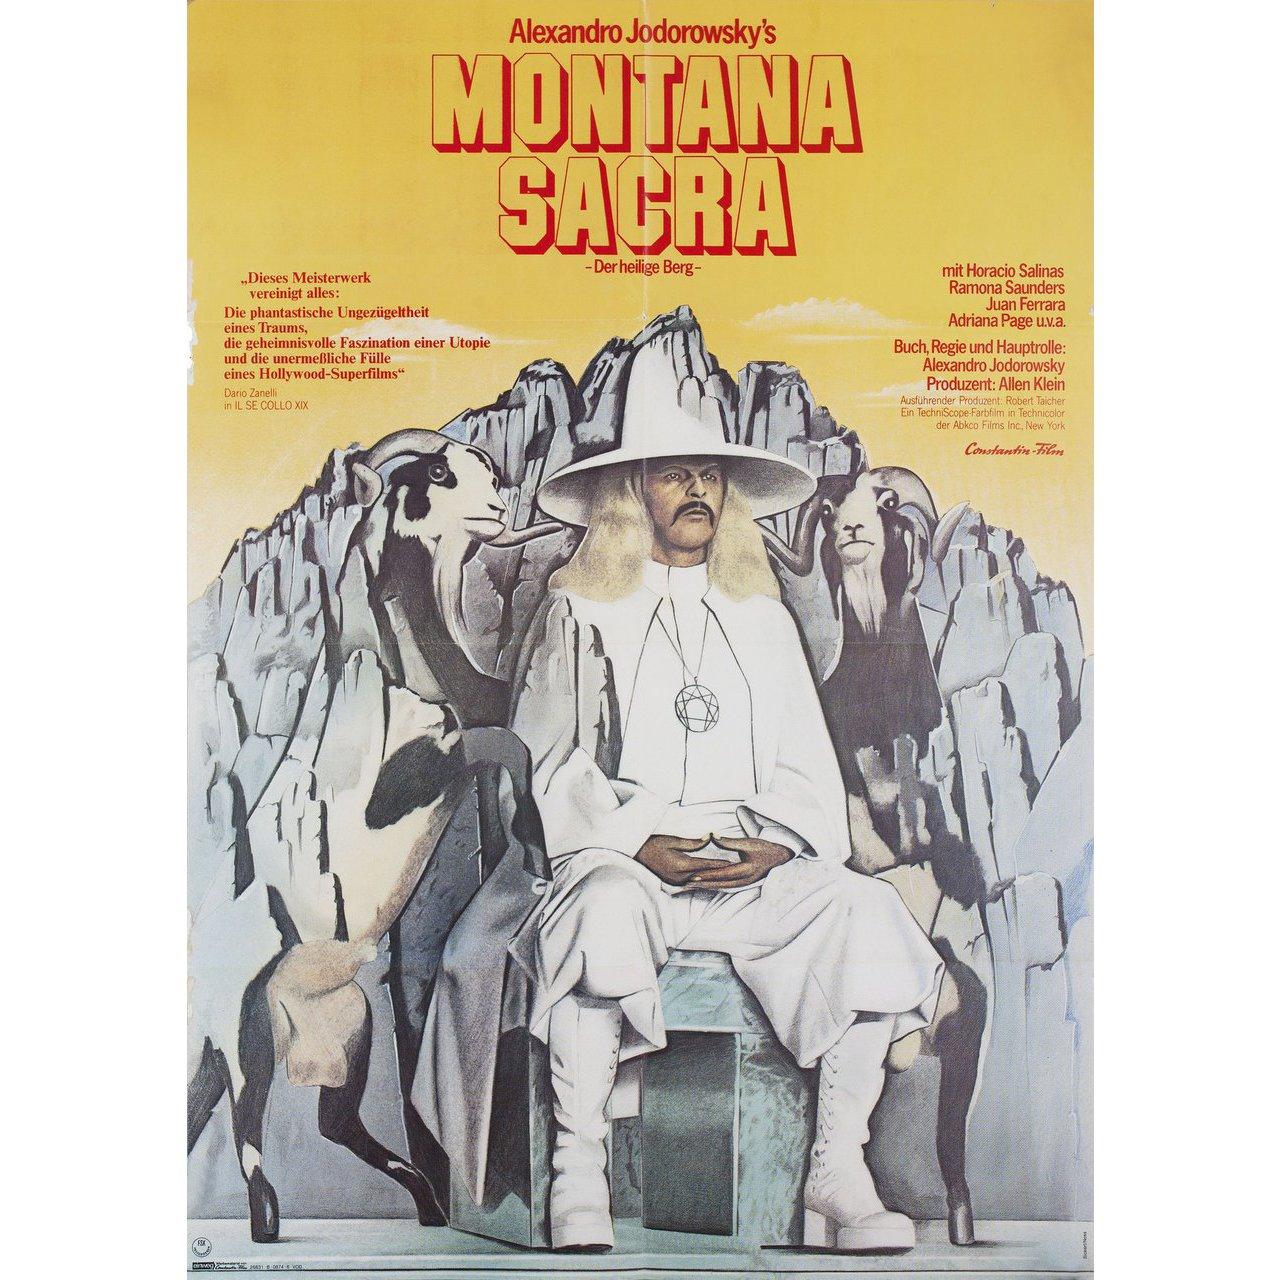 Original 1974 German A1 poster by Peter Sickert / Dieter Noss for the first German theatrical release of the film The Holy Mountain (La Montana sagrada) directed by Alejandro Jodorowsky with Alejandro Jodorowsky / Horacio Salinas / Zamira Saunders /